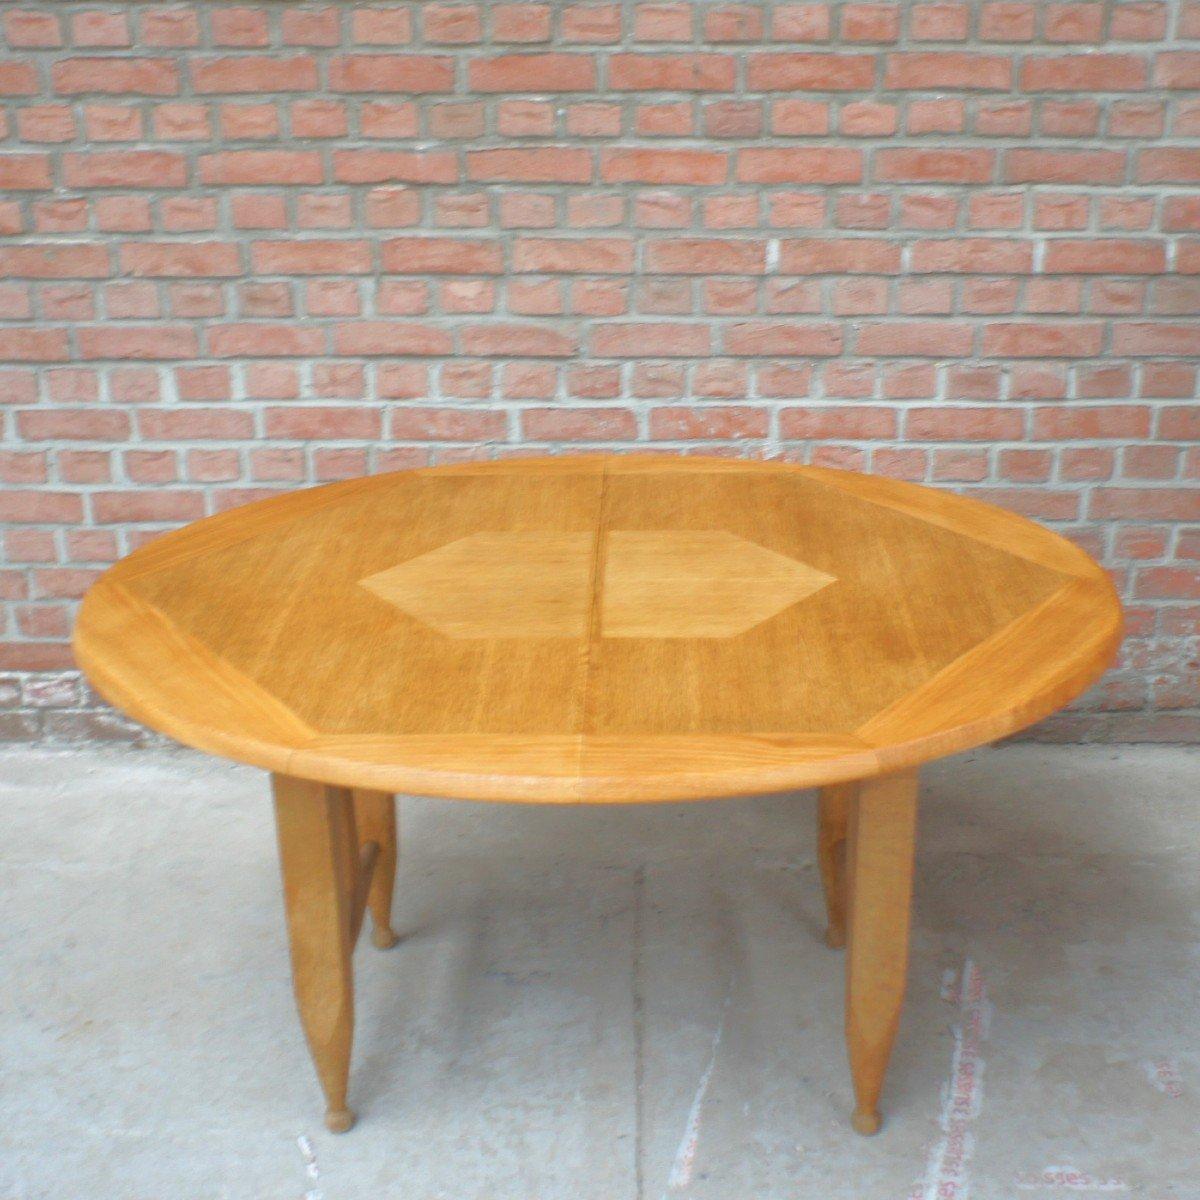 Very pretty oval table wood marquetry by Guillerme and Chambron. This table has its two original extensions allowing its length to be increased to 202cms. The tray has been cleaned and waxed, it has no knocks or scratches.